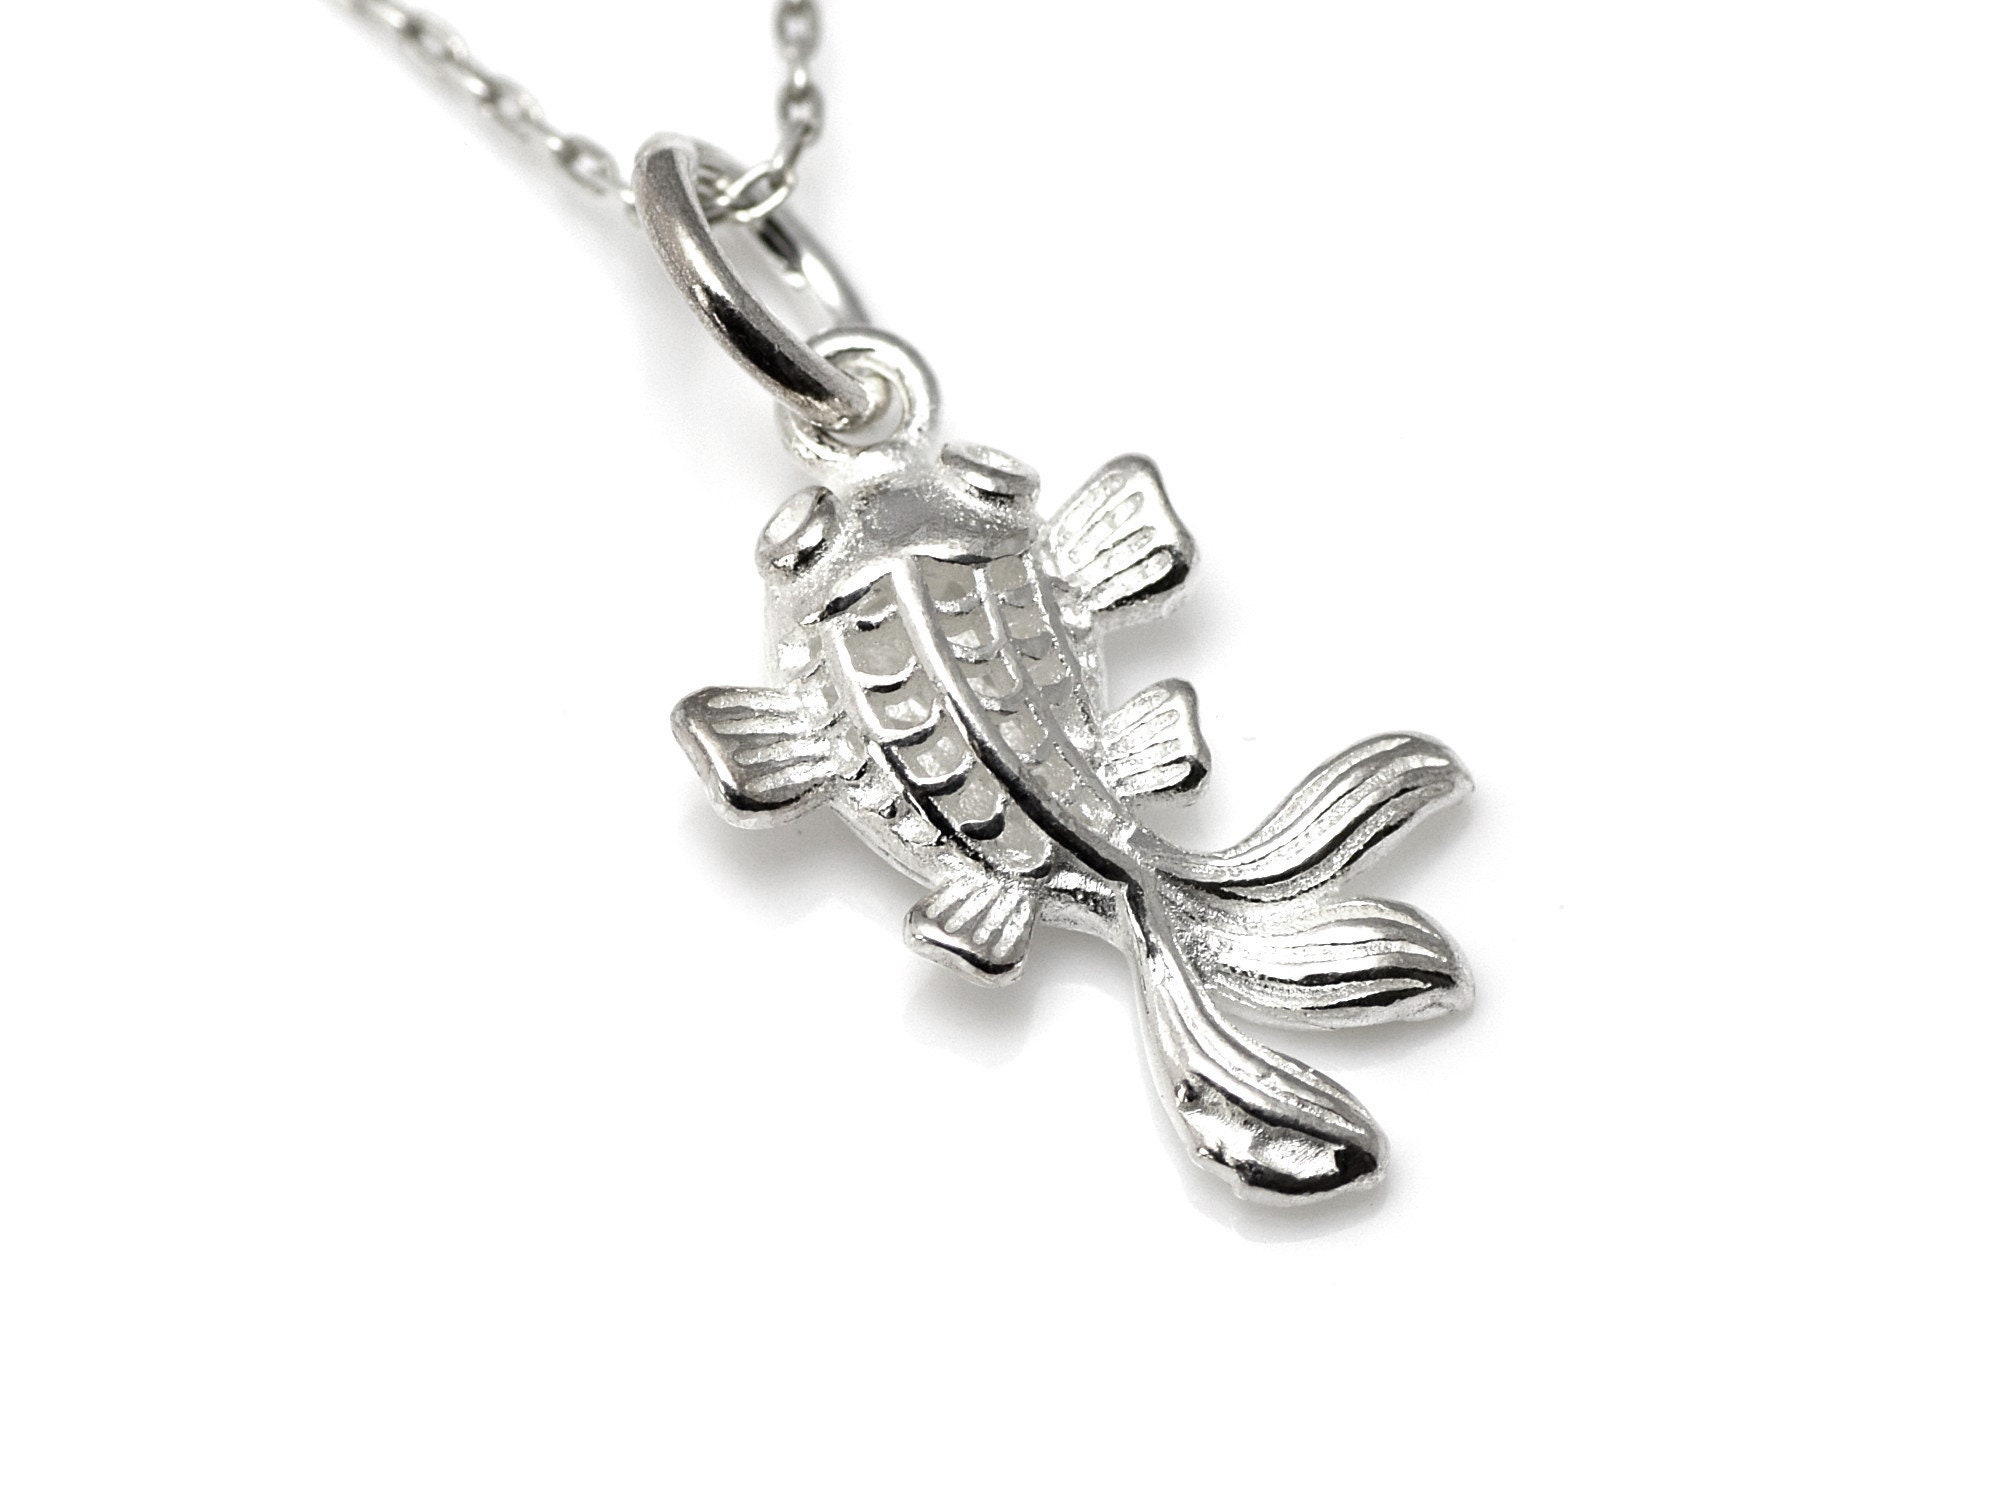 Fish Necklace in Sterling Silver, Natuical Pendant, Ocean Animal Jewelry